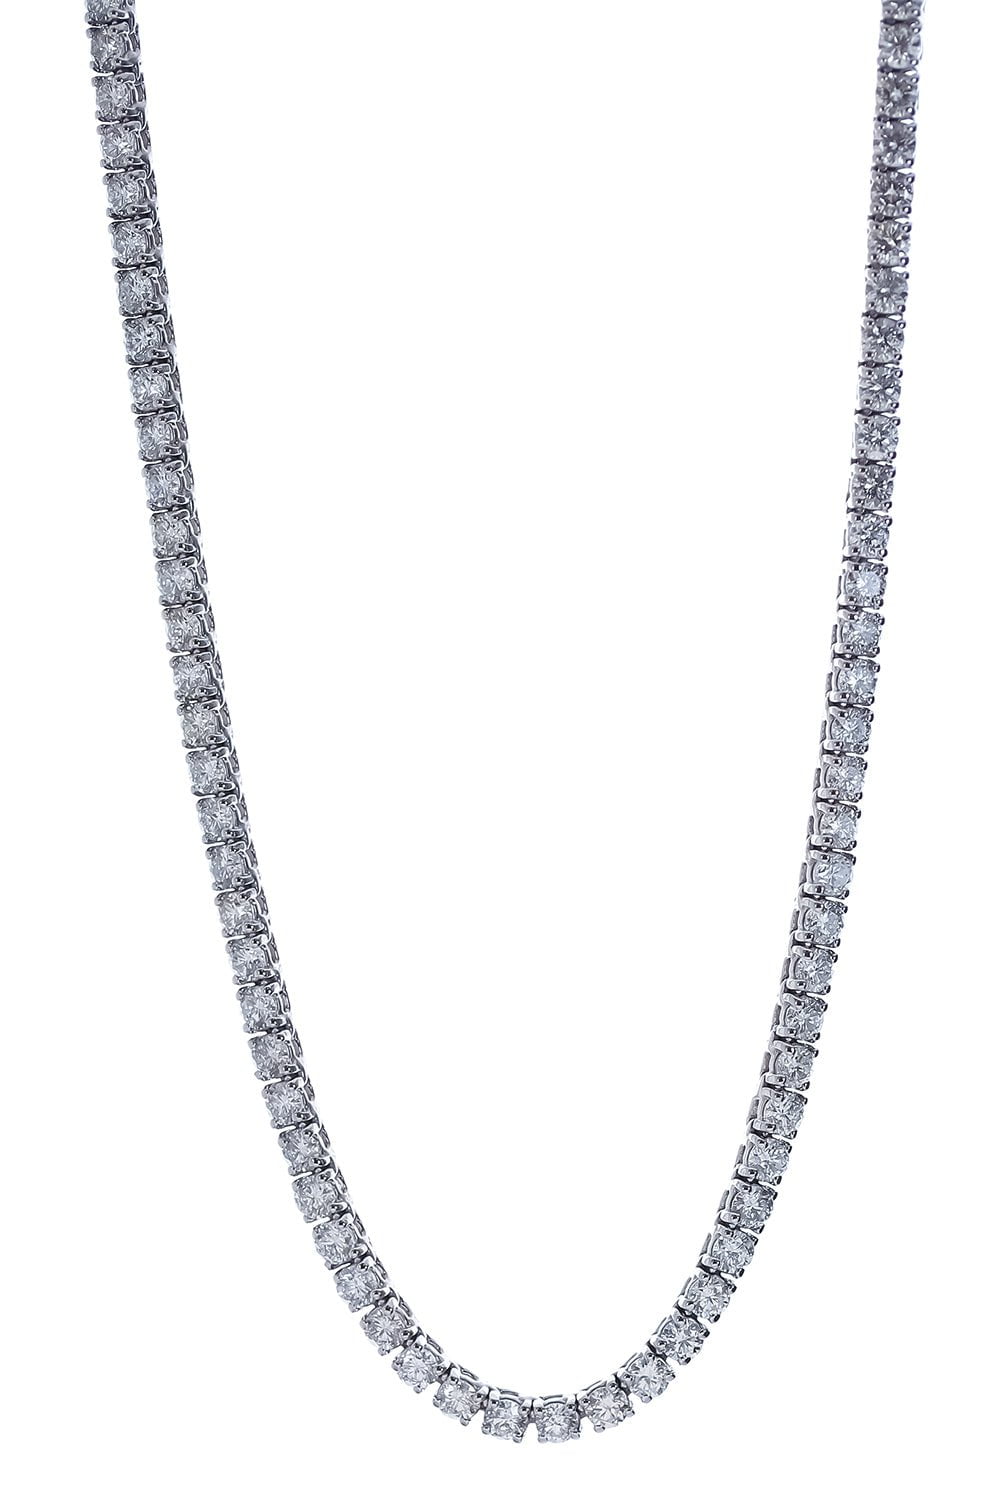 DIANA M. JEWELS-Tennis Necklace-WHITE GOLD